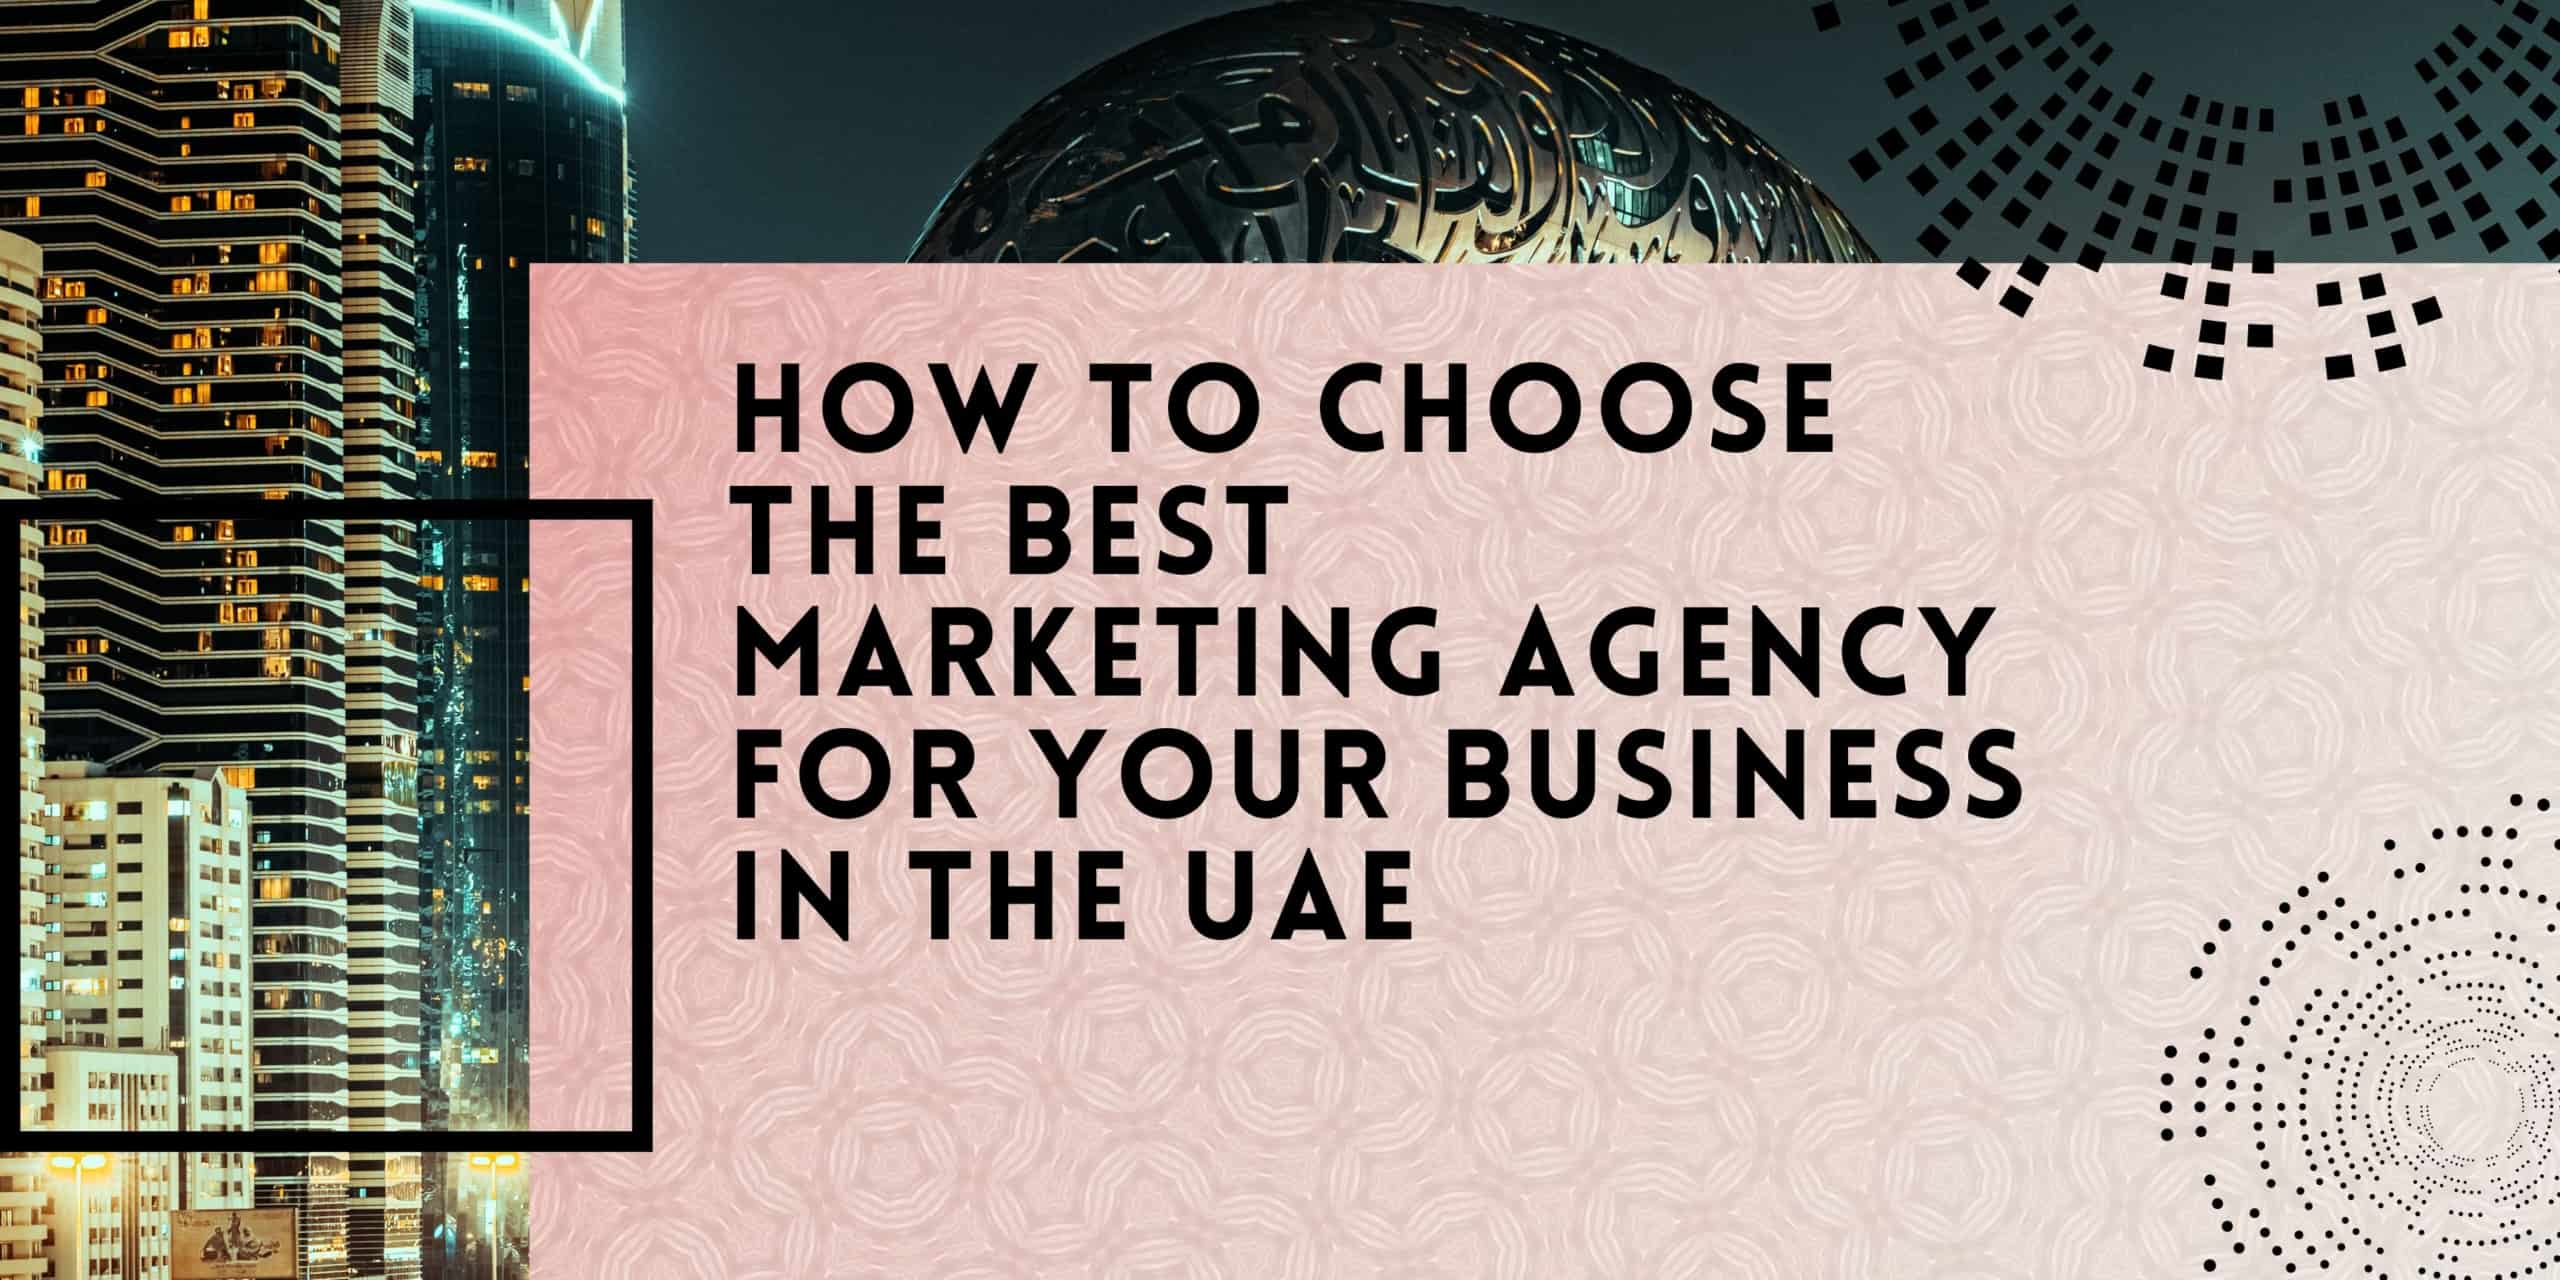 How to Choose the Best Marketing Agency for Your Business in the UAE